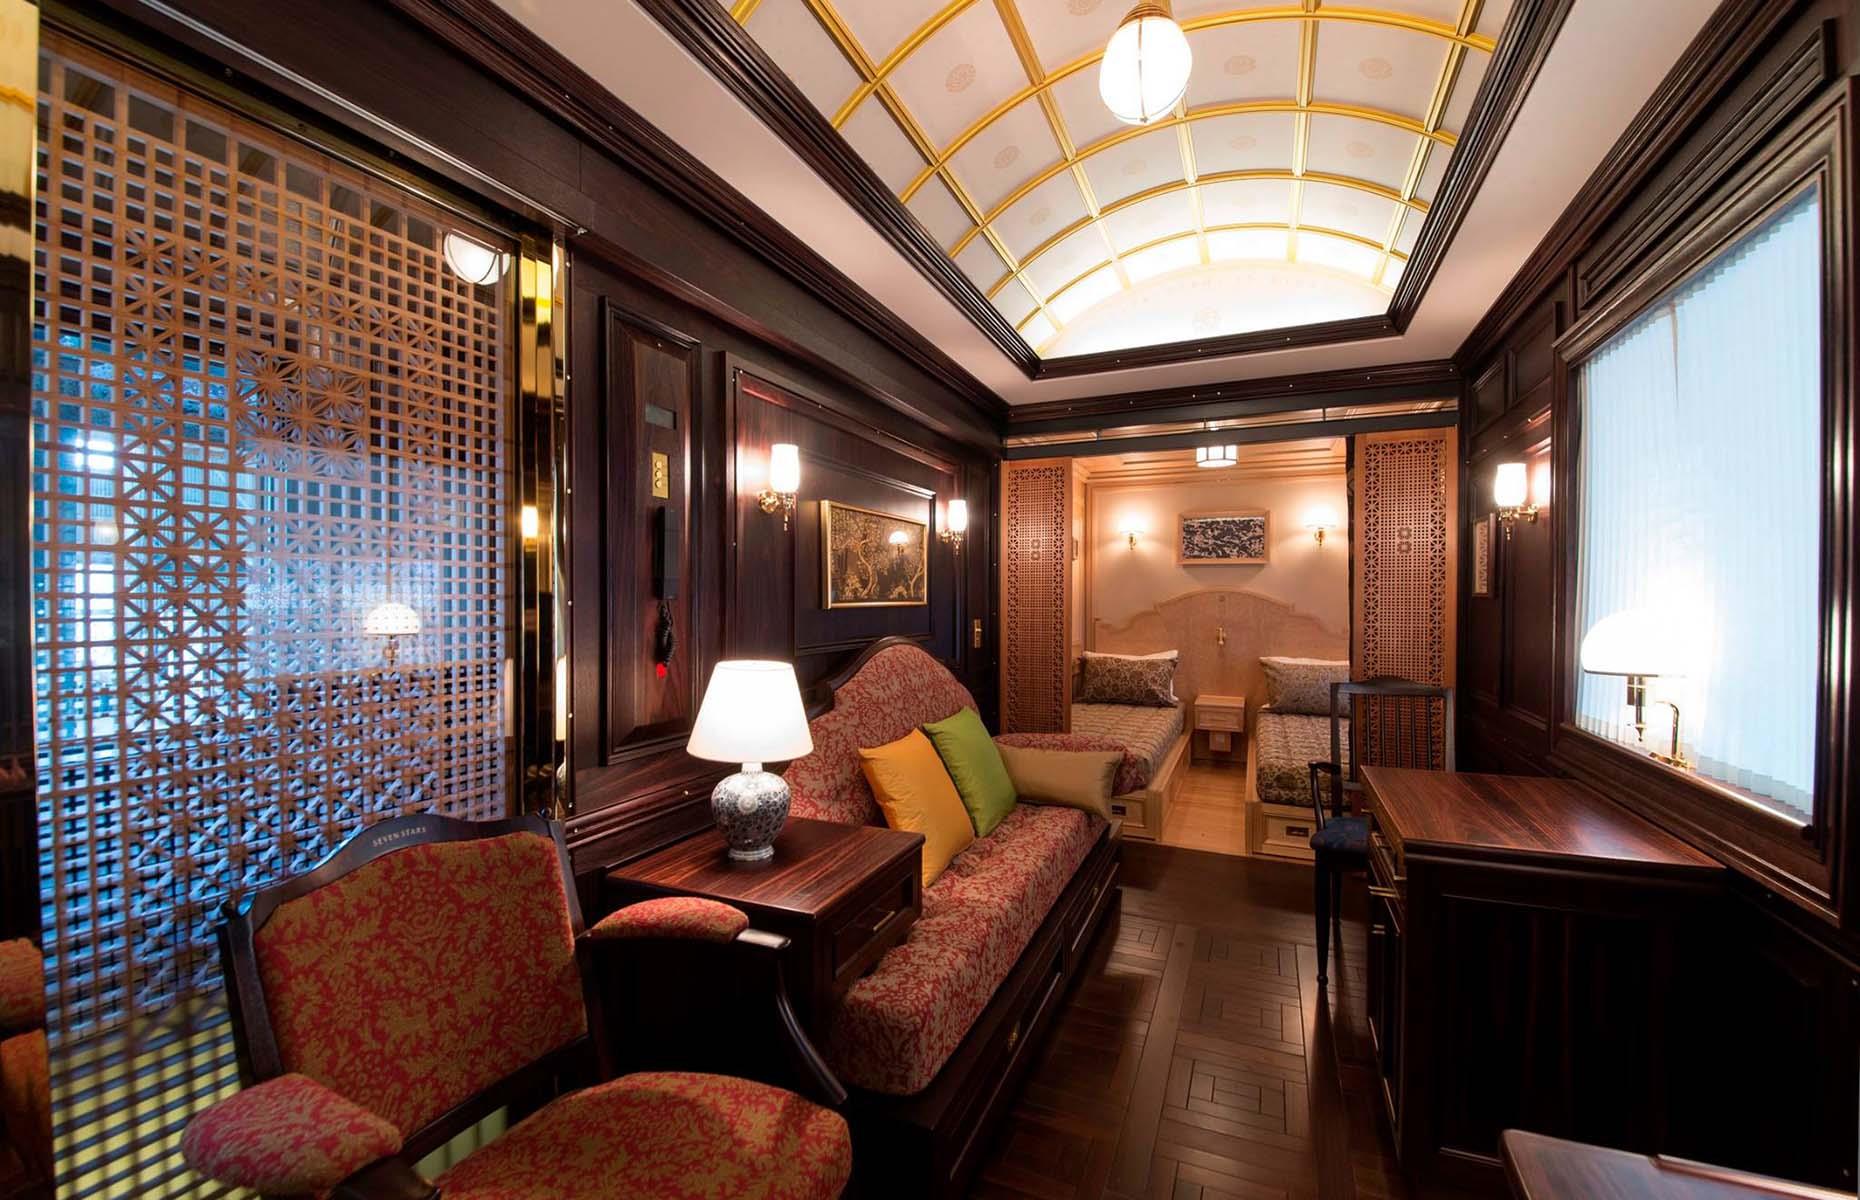 <p>Japan's Seven Stars is a so-called cruise train that takes travelers on a multi-day tour around the island of Kyushu and is <a href="https://www.travelandleisure.com/trip-ideas/bus-train/worlds-most-luxurious-trains?slide=369a2d7d-0d3c-4fae-adbf-ae311a459c31#369a2d7d-0d3c-4fae-adbf-ae311a459c31">often considered to be among the most exclusive and expensive train journeys in the world</a>. Bagging a ticket on this exquisite service is not as easy as just heading to the booking site – only 28 passengers travel on each journey, so prospective riders must enter a lottery to be invited to purchase a ticket for an upcoming departure.</p>  <p><a href="https://www.loveexploring.com/galleries/115509/jawdropping-rail-journeys-youll-never-forget?page=1"><strong>Take a look at these jaw-dropping rail journeys you'll never forget</strong></a></p>